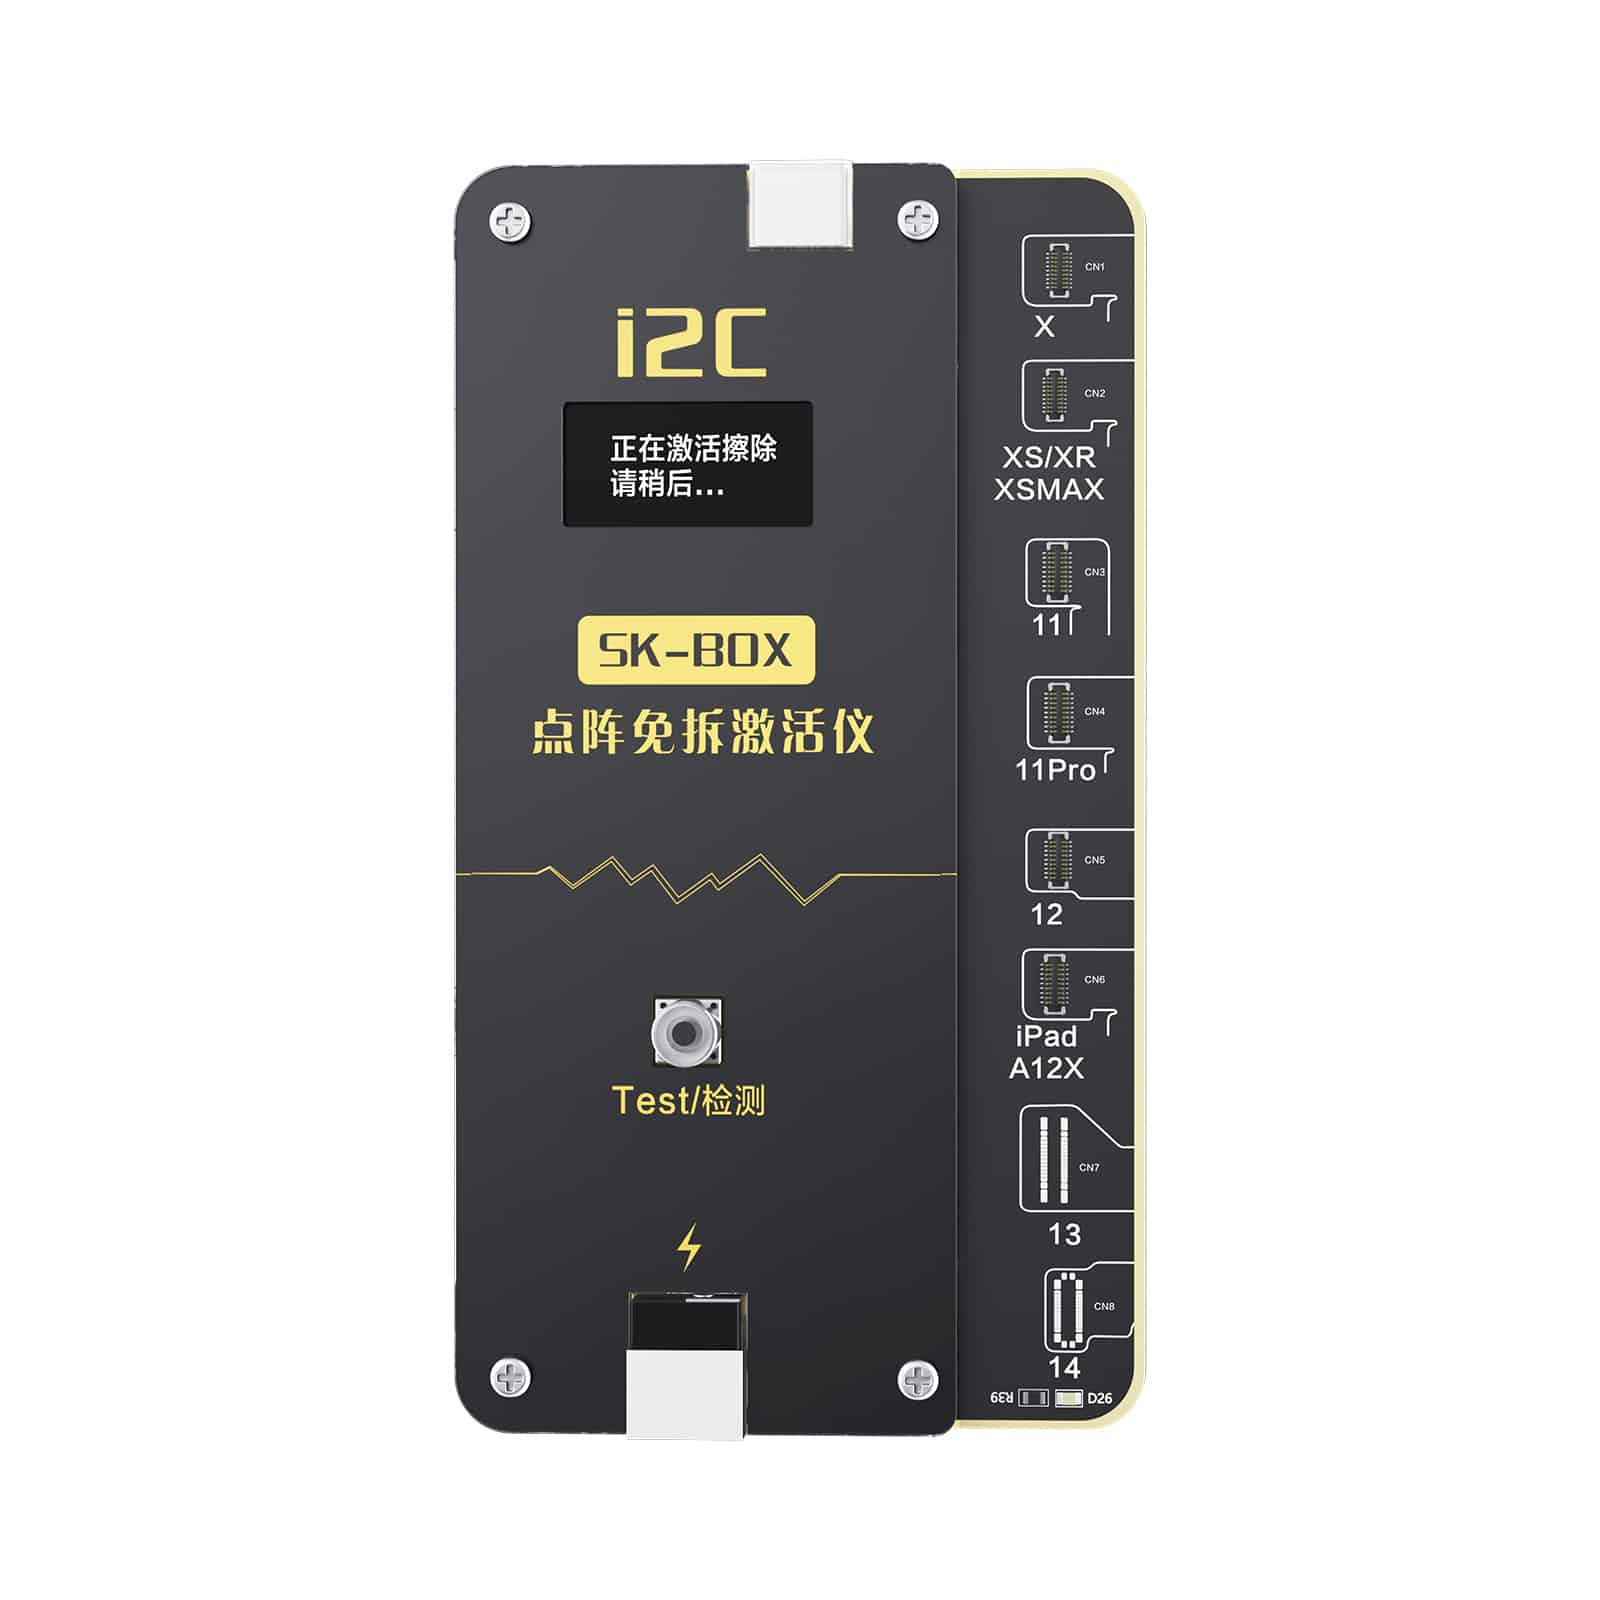 I2C 35 In 1 Face-14 Dot Matrix Programmer for IPhone X to 14PM Lattice IC Read Write Repair Face ID Dot Flex Cable Replace